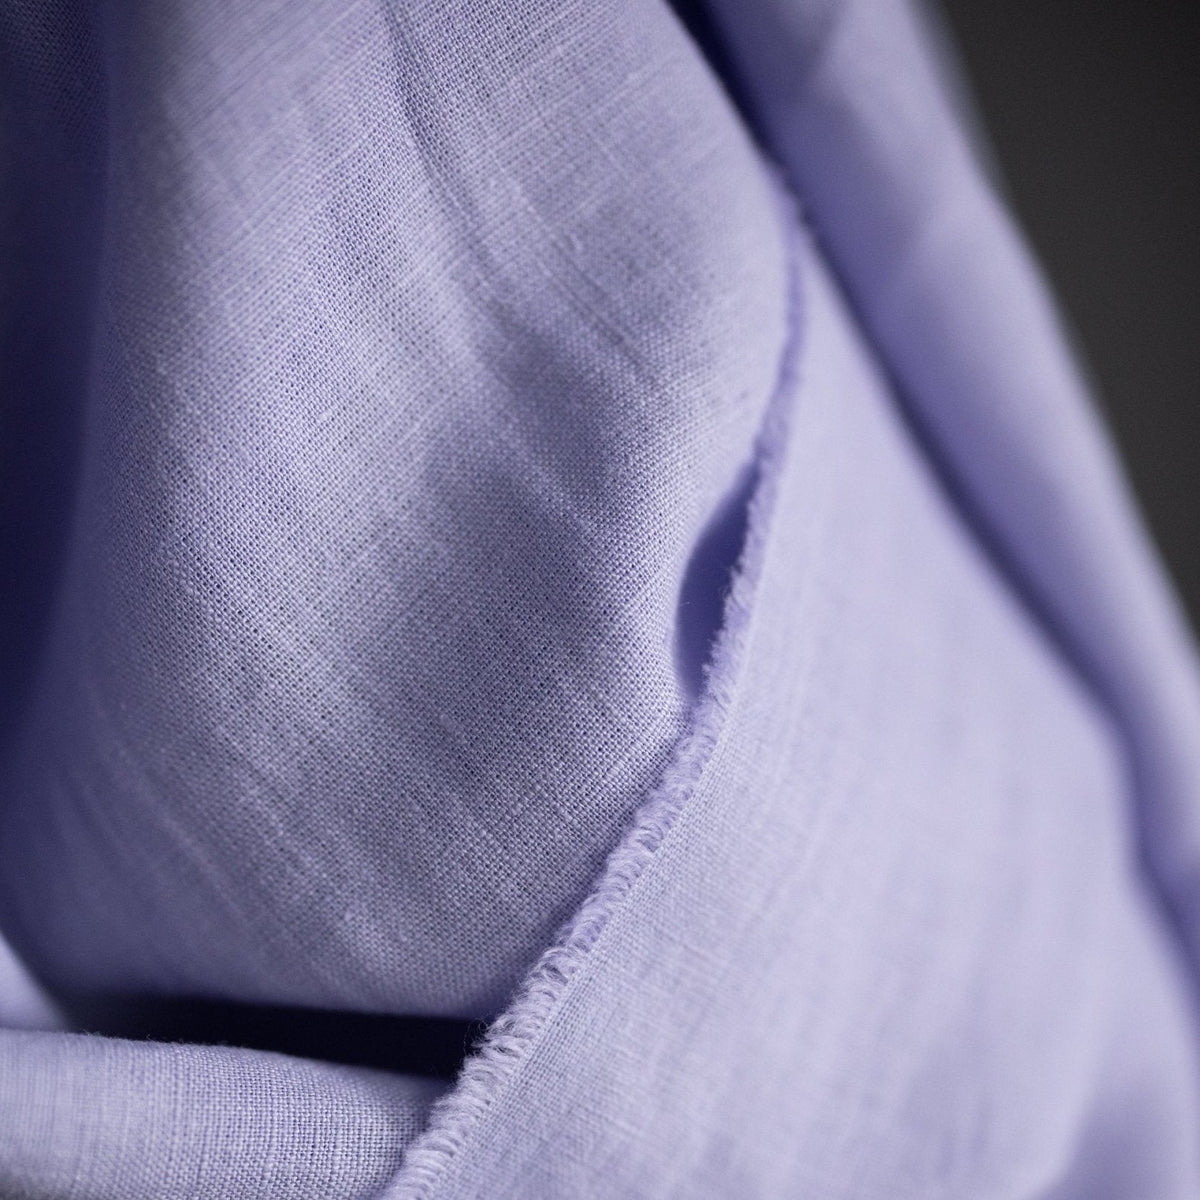 European Laundered Linen 185gsm in Miss Lilac | Merchant & Mills designer sewing fabric | Stitch Piece Loop | Online Fabric & Sewing Supplies | A carefully curated range   focusing on ethically produced & sustainable fabrics of the highest quality, perfect for the modern & considered sewist’s memade wardrobe | Australia